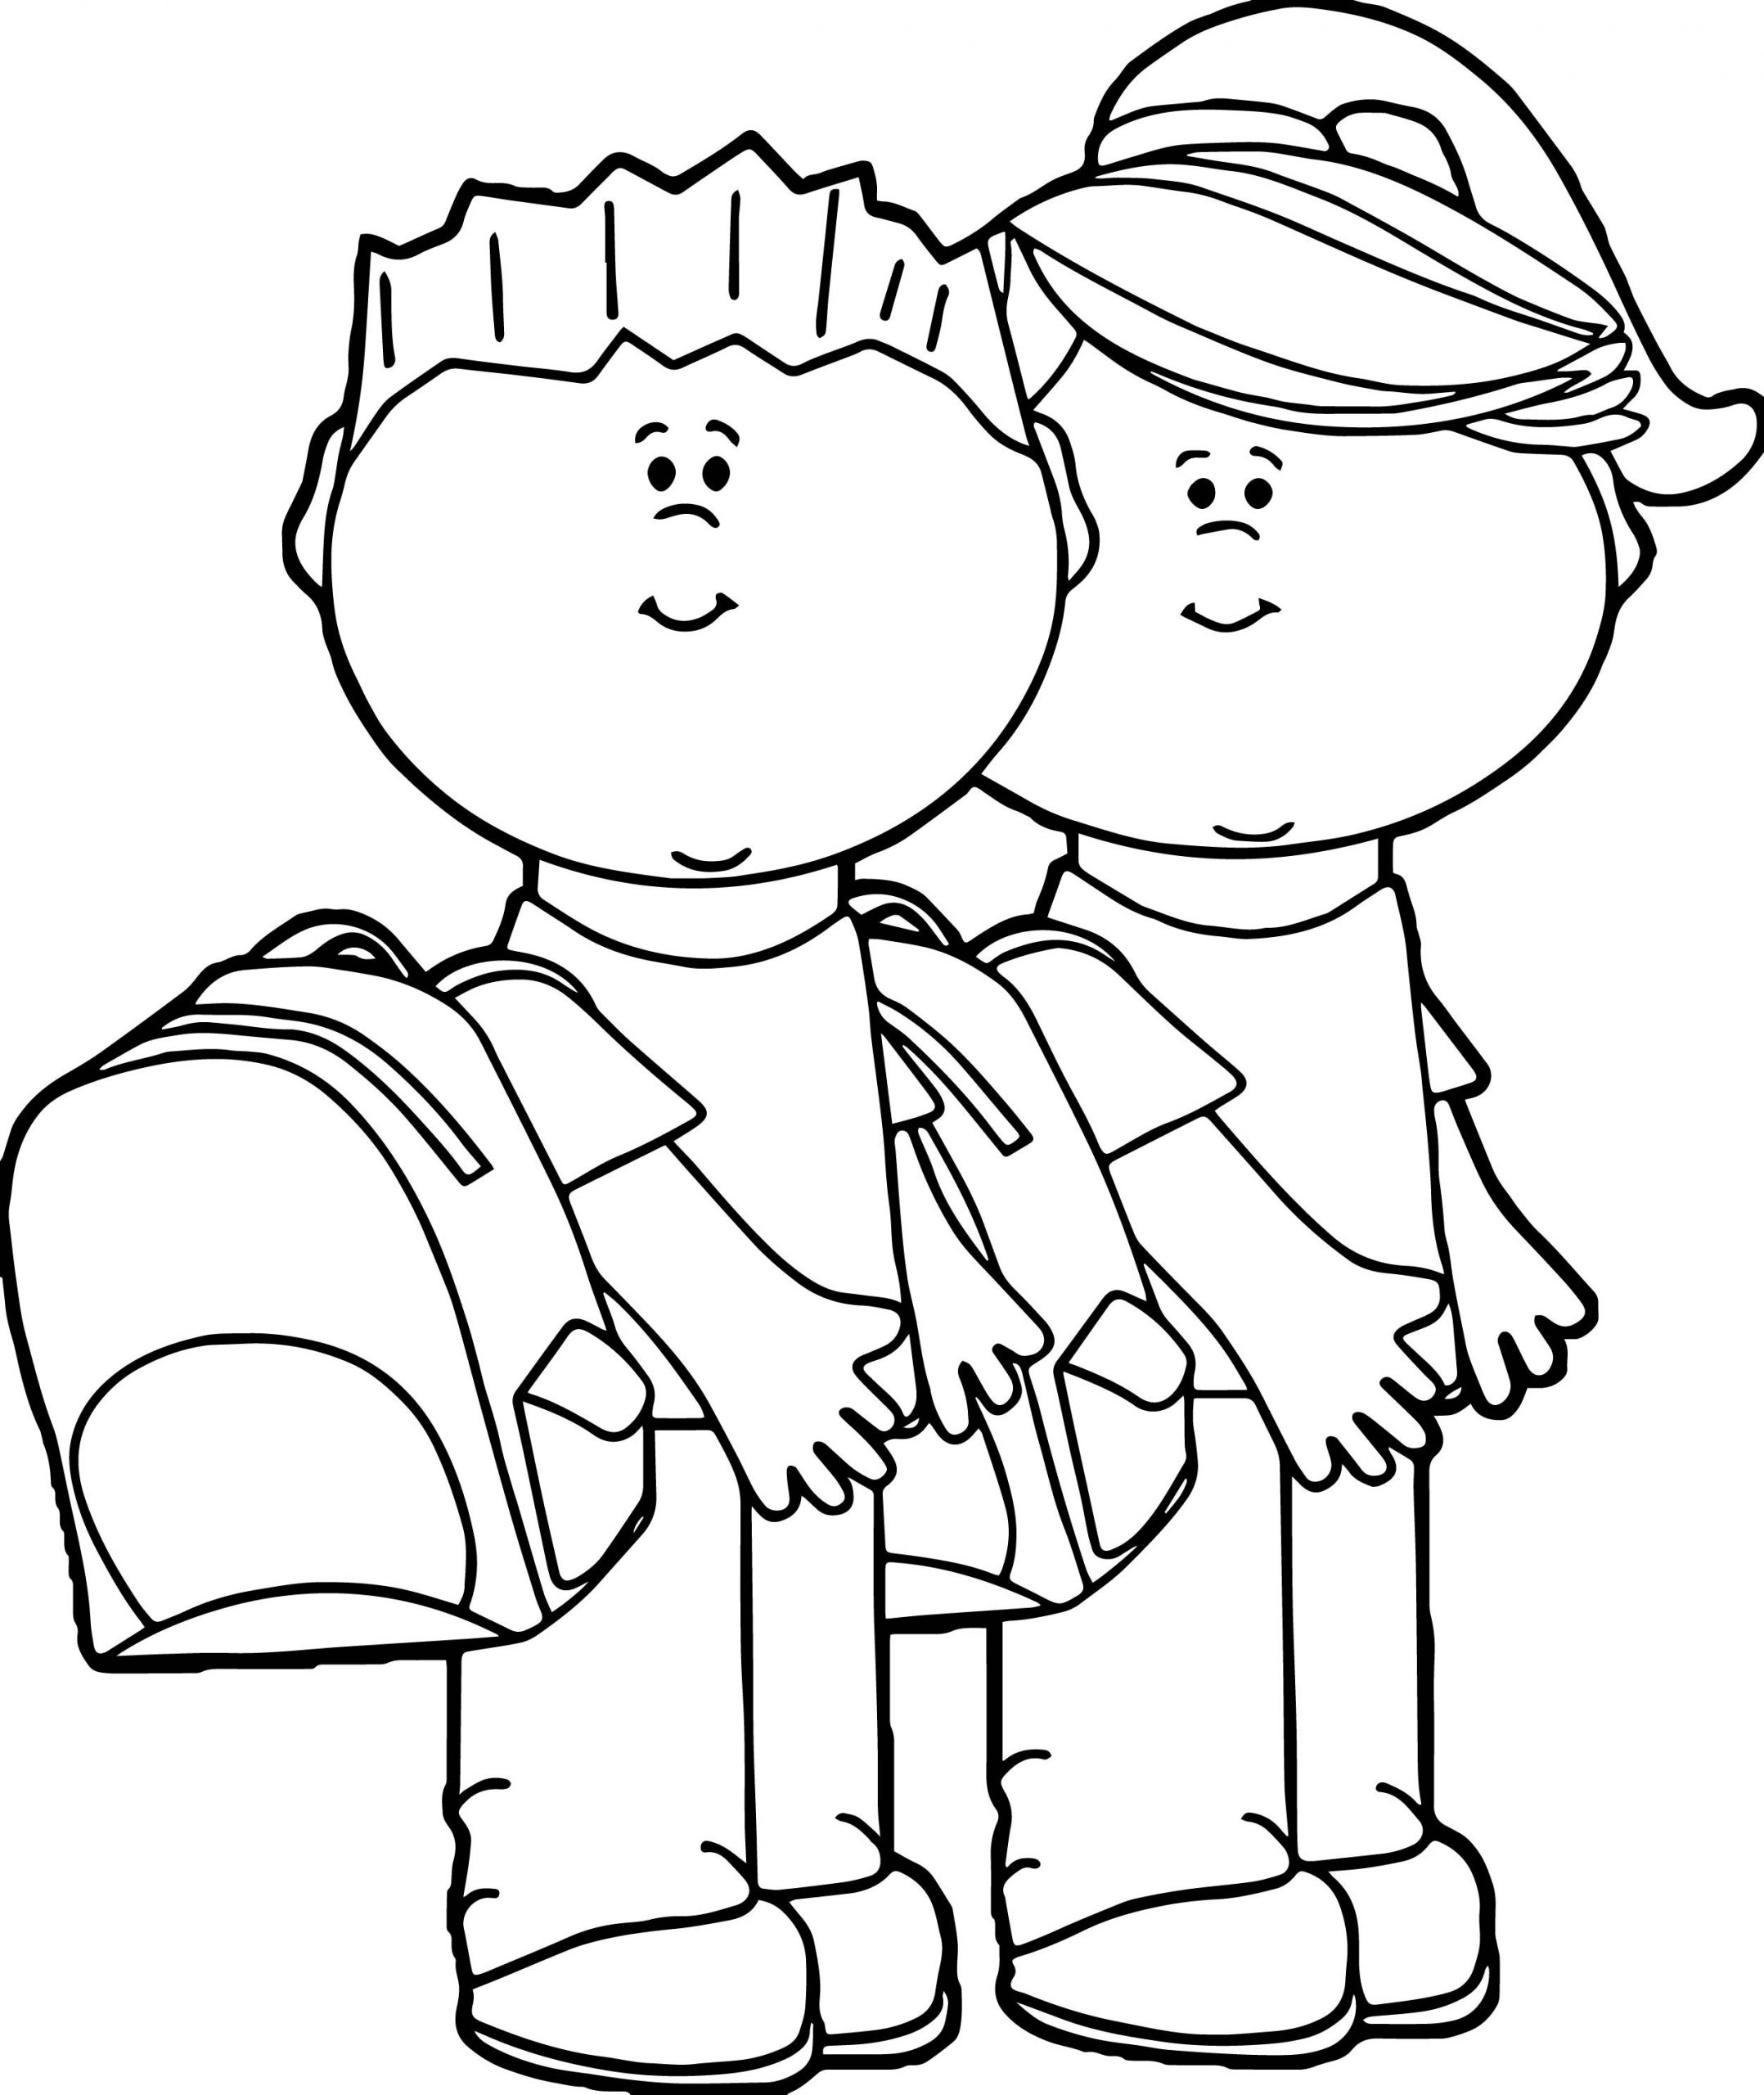 Children Coloring Page
 Kids Going To School Kids Coloring Page